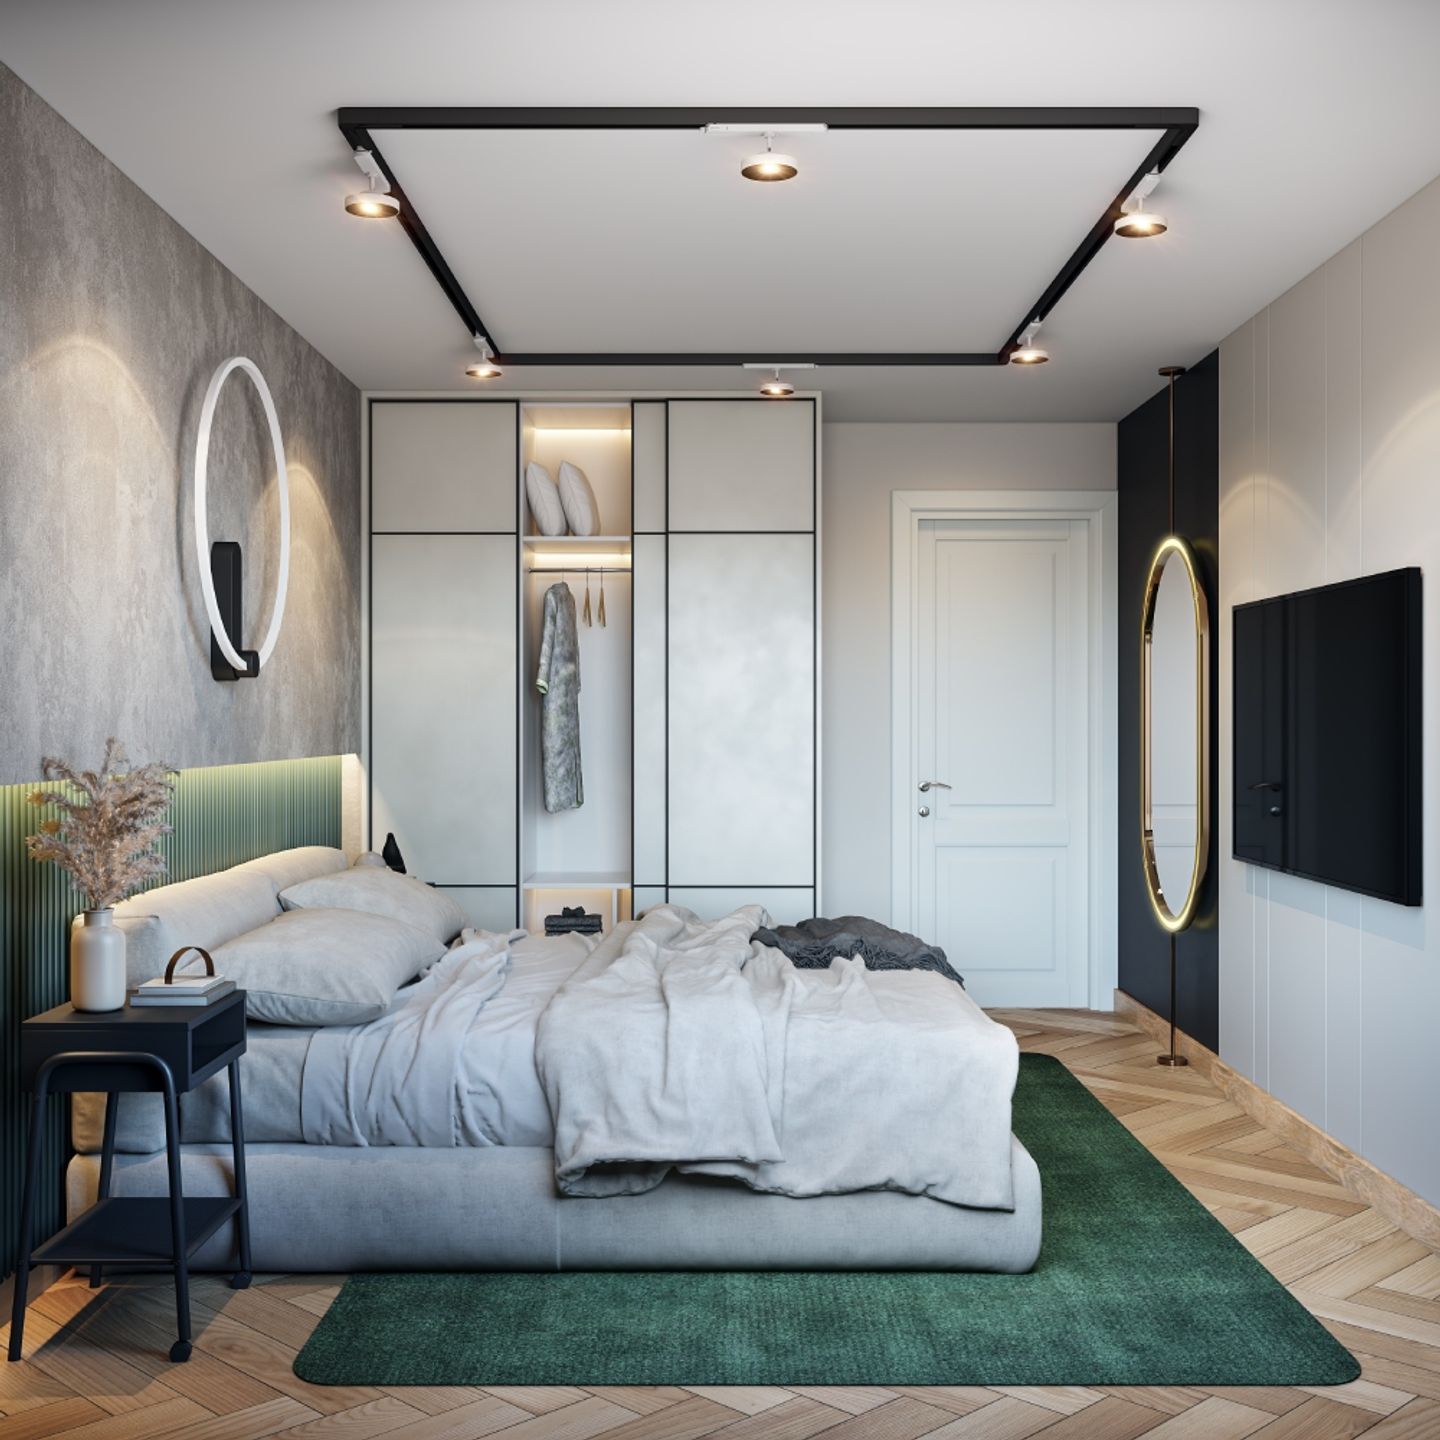 Bedroom Design With A Single Bed And A Spacious Wardrobe With Mirrors - Livspace